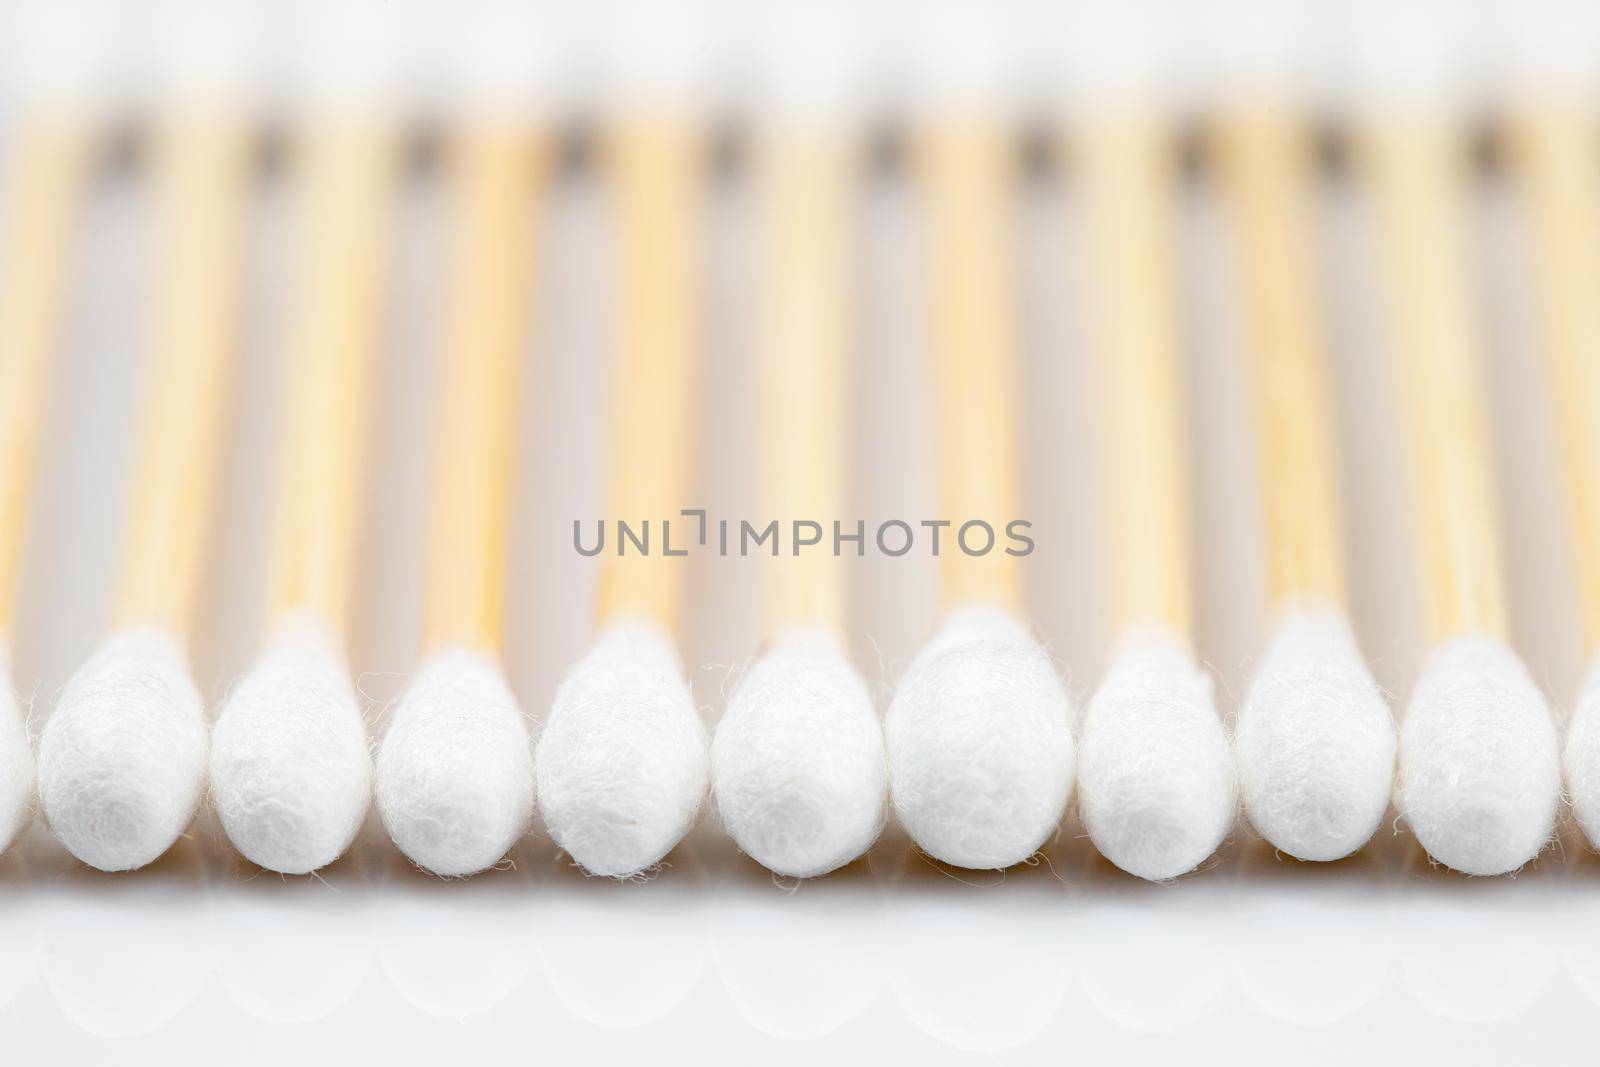 Zero waste bamboo cotton swabs on white background by Syvanych